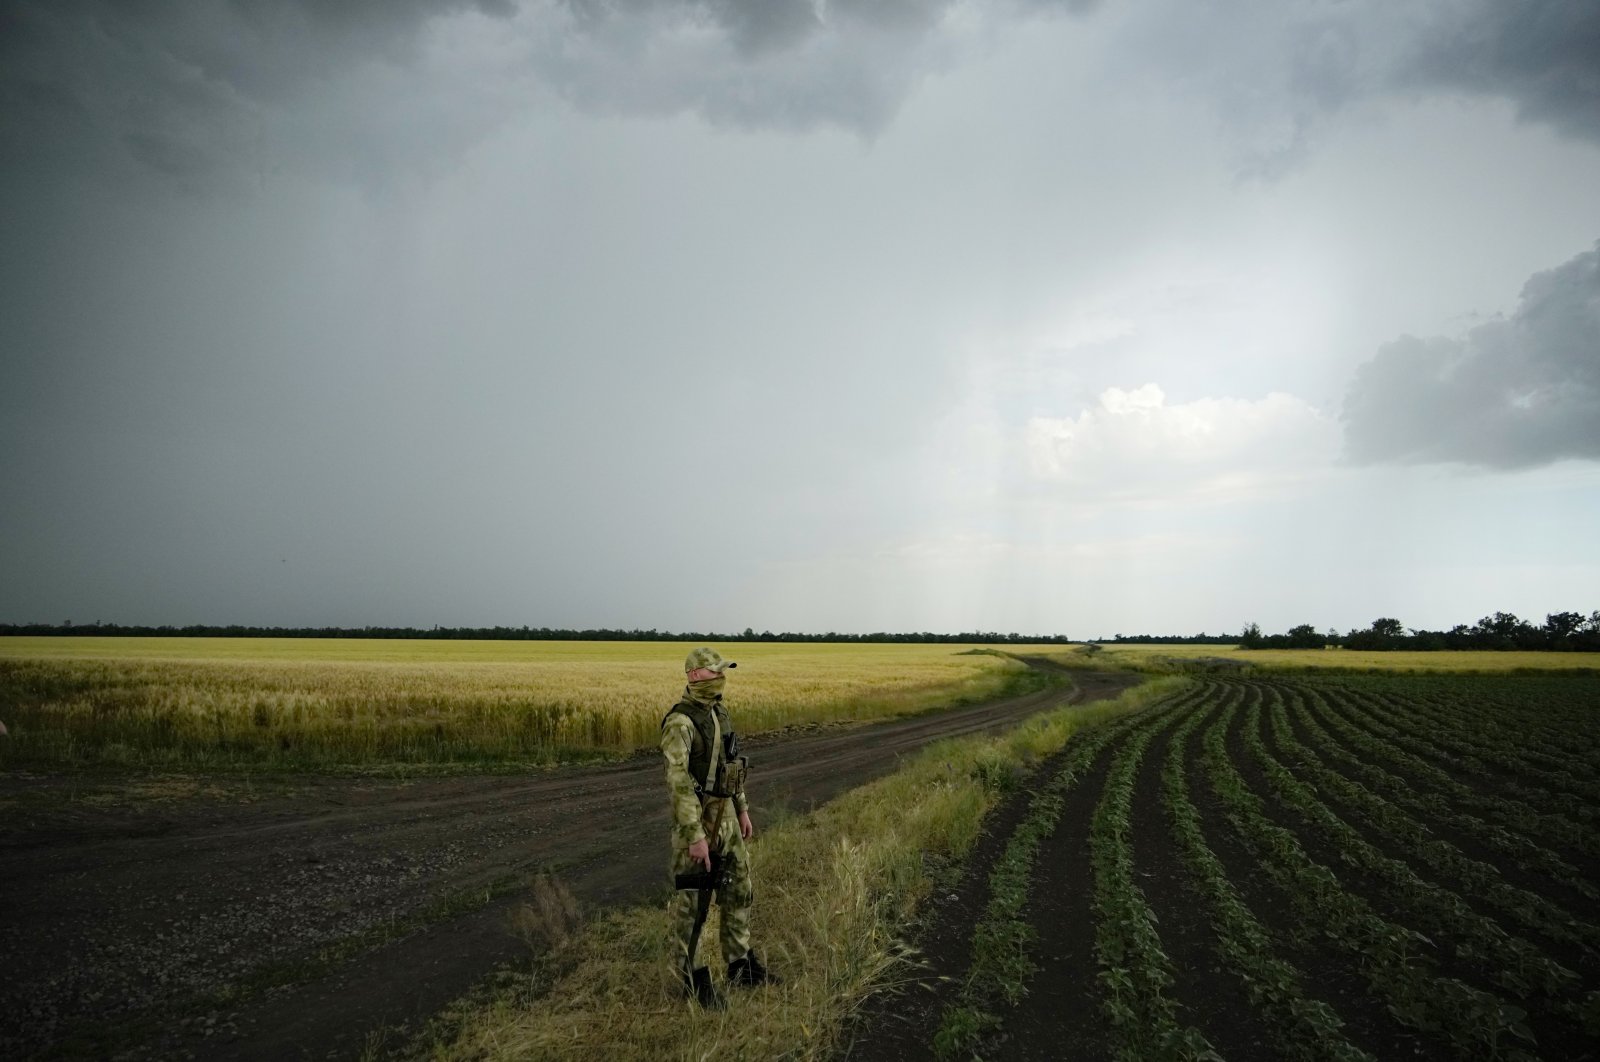  A Russian soldier guards an area next to a field of wheat as journalists work in the Zaporizhzhia region in an area under Russian military control, southeastern Ukraine, June 14, 2022. (AP Photo)